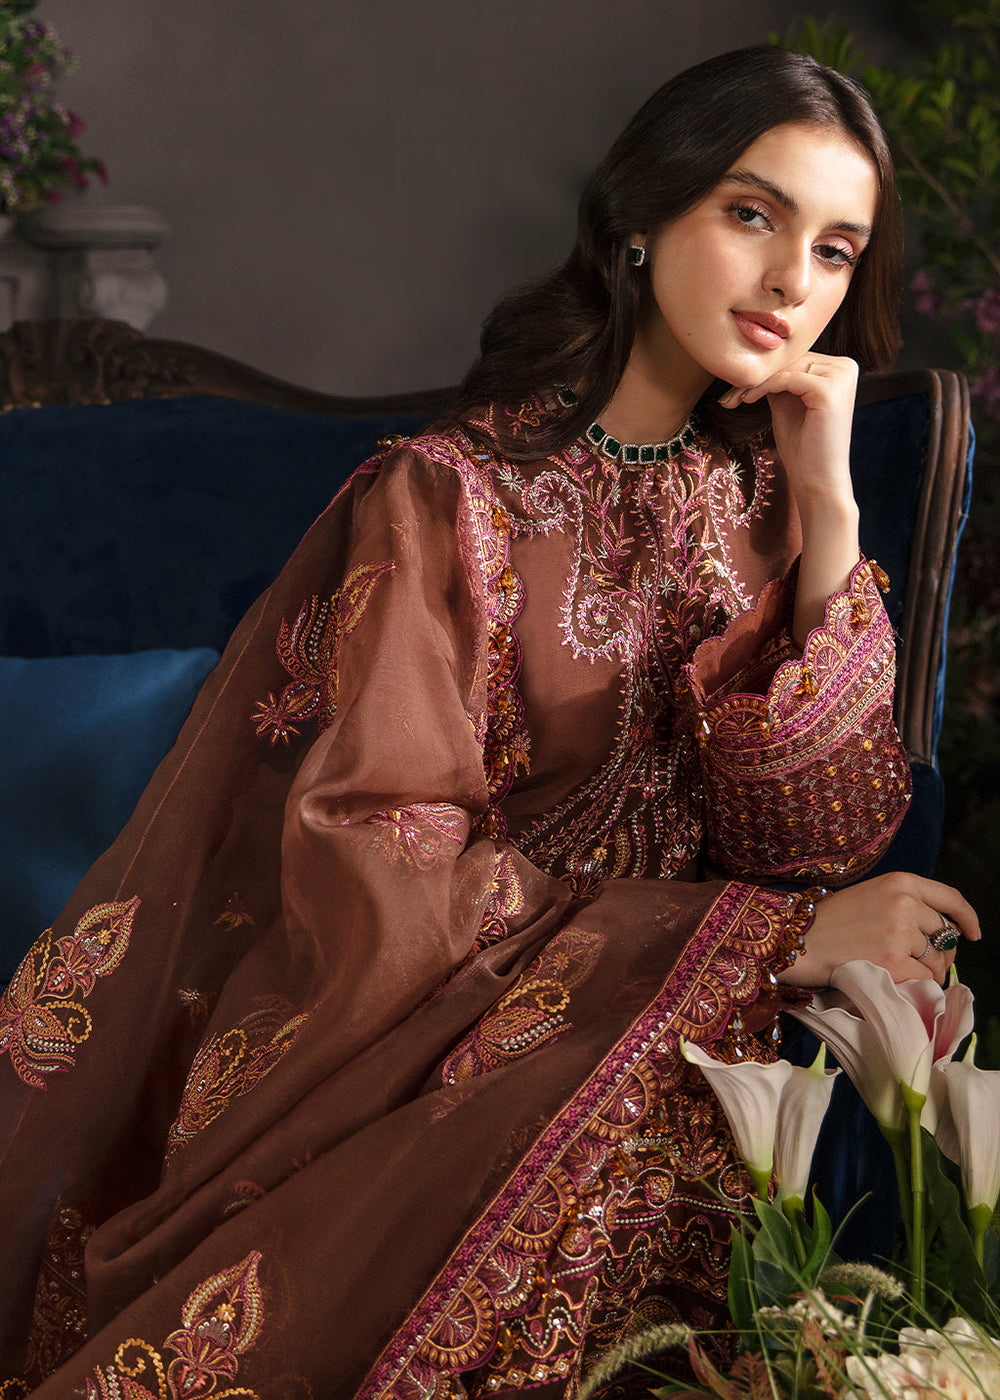 Buy Now Brown Pakistani Palazzo Suit - Afrozeh La Fuchsia Formals '23 - Mahogany Online in USA, UK, Canada & Worldwide at Empress Clothing.